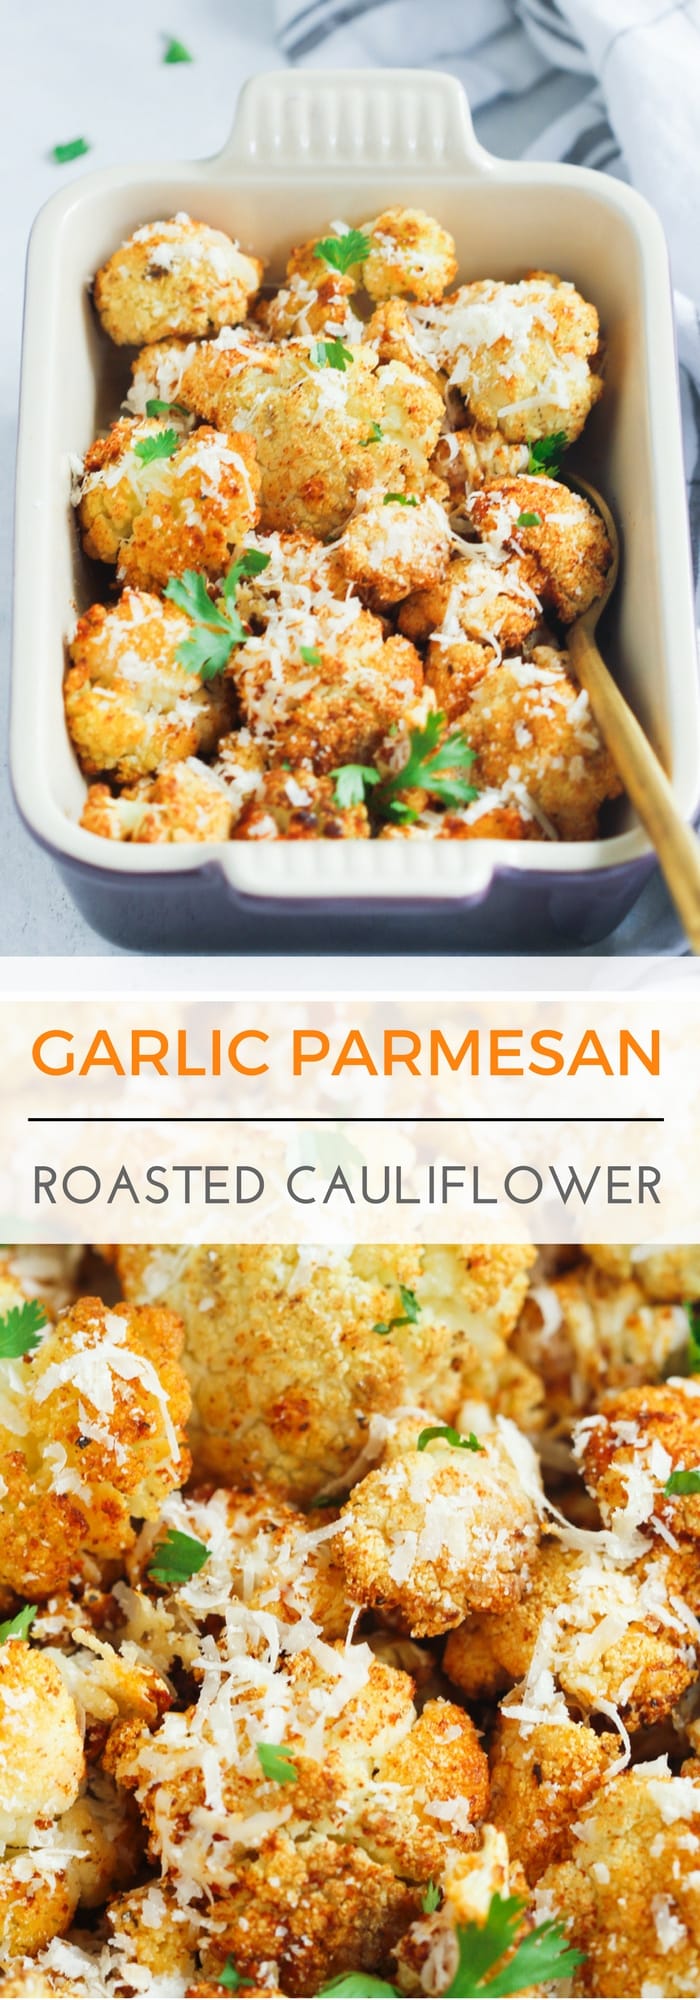 Garlic Parmesan Roasted Cauliflower - This easy Garlic Parmesan Roasted Cauliflower is a perfect low-carb side dish for any occasion. It’s well seasoned with garlic, black pepper, paprika and Parmesan. | www.primaverakitchen.com